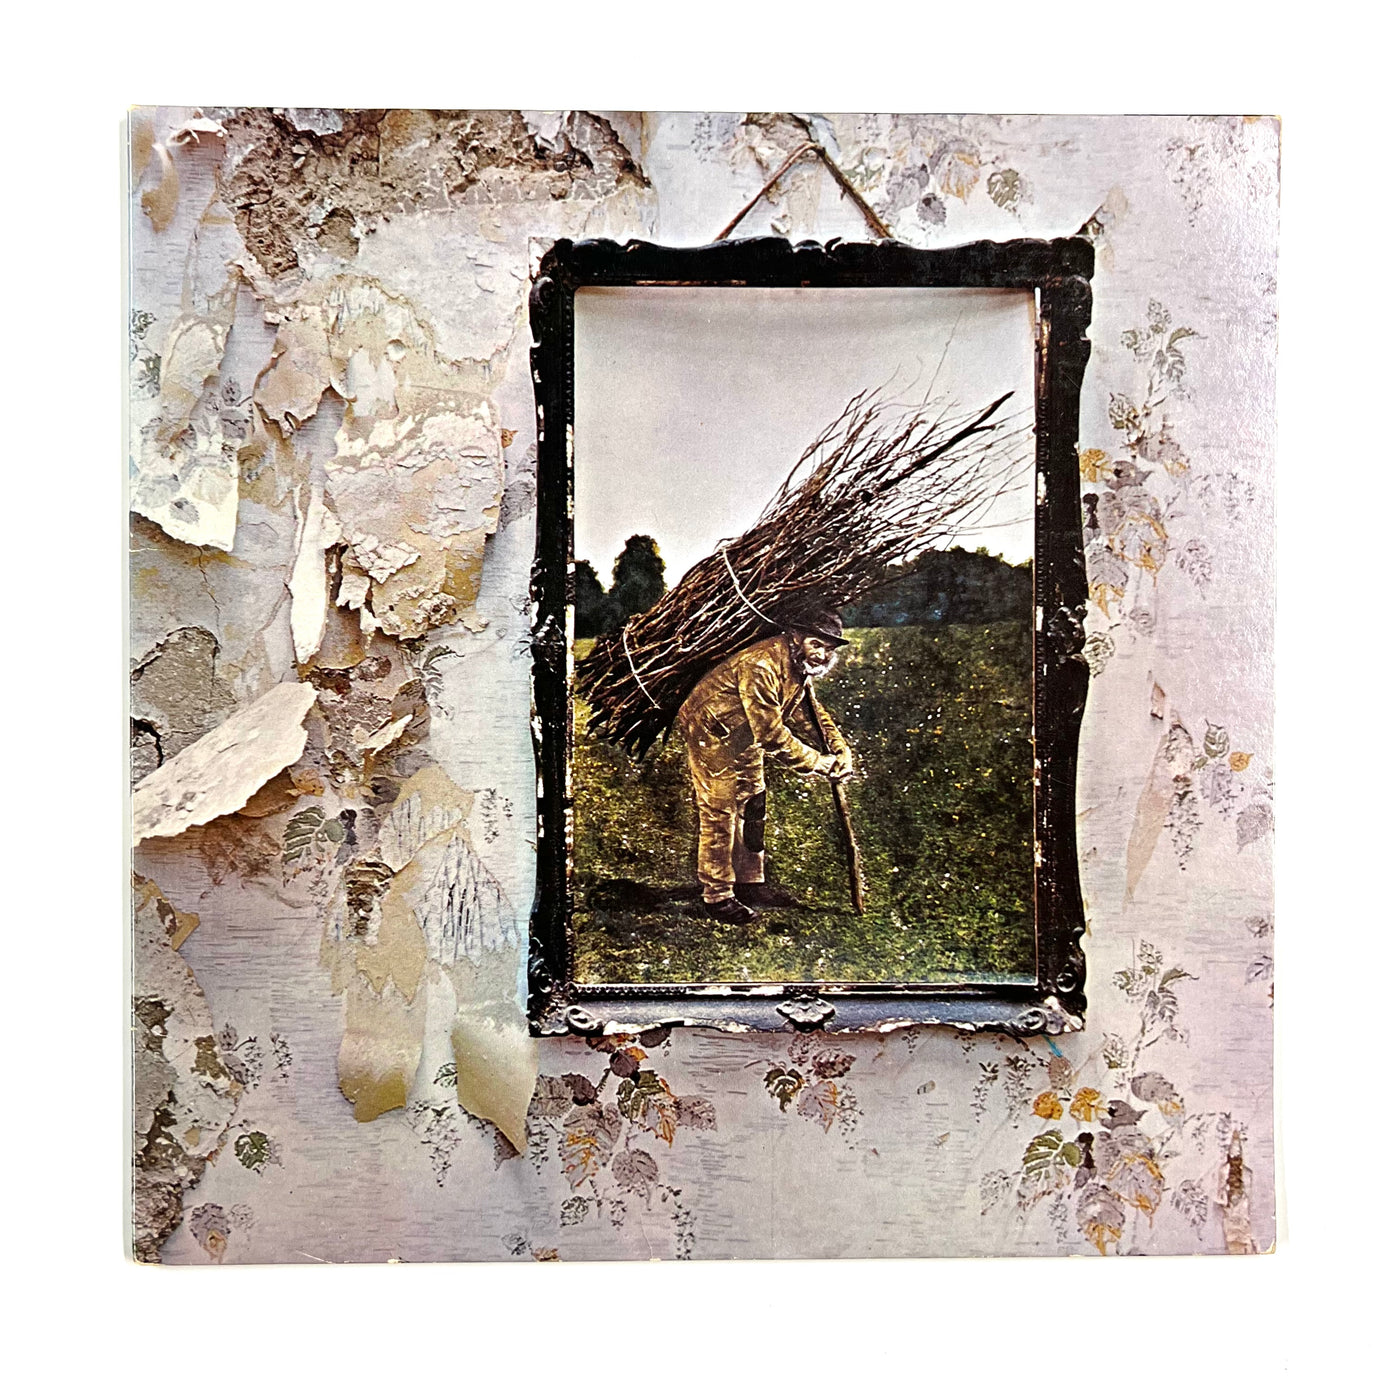 Led Zeppelin - Untitled - 1977 Reissue, Specialty Pressing